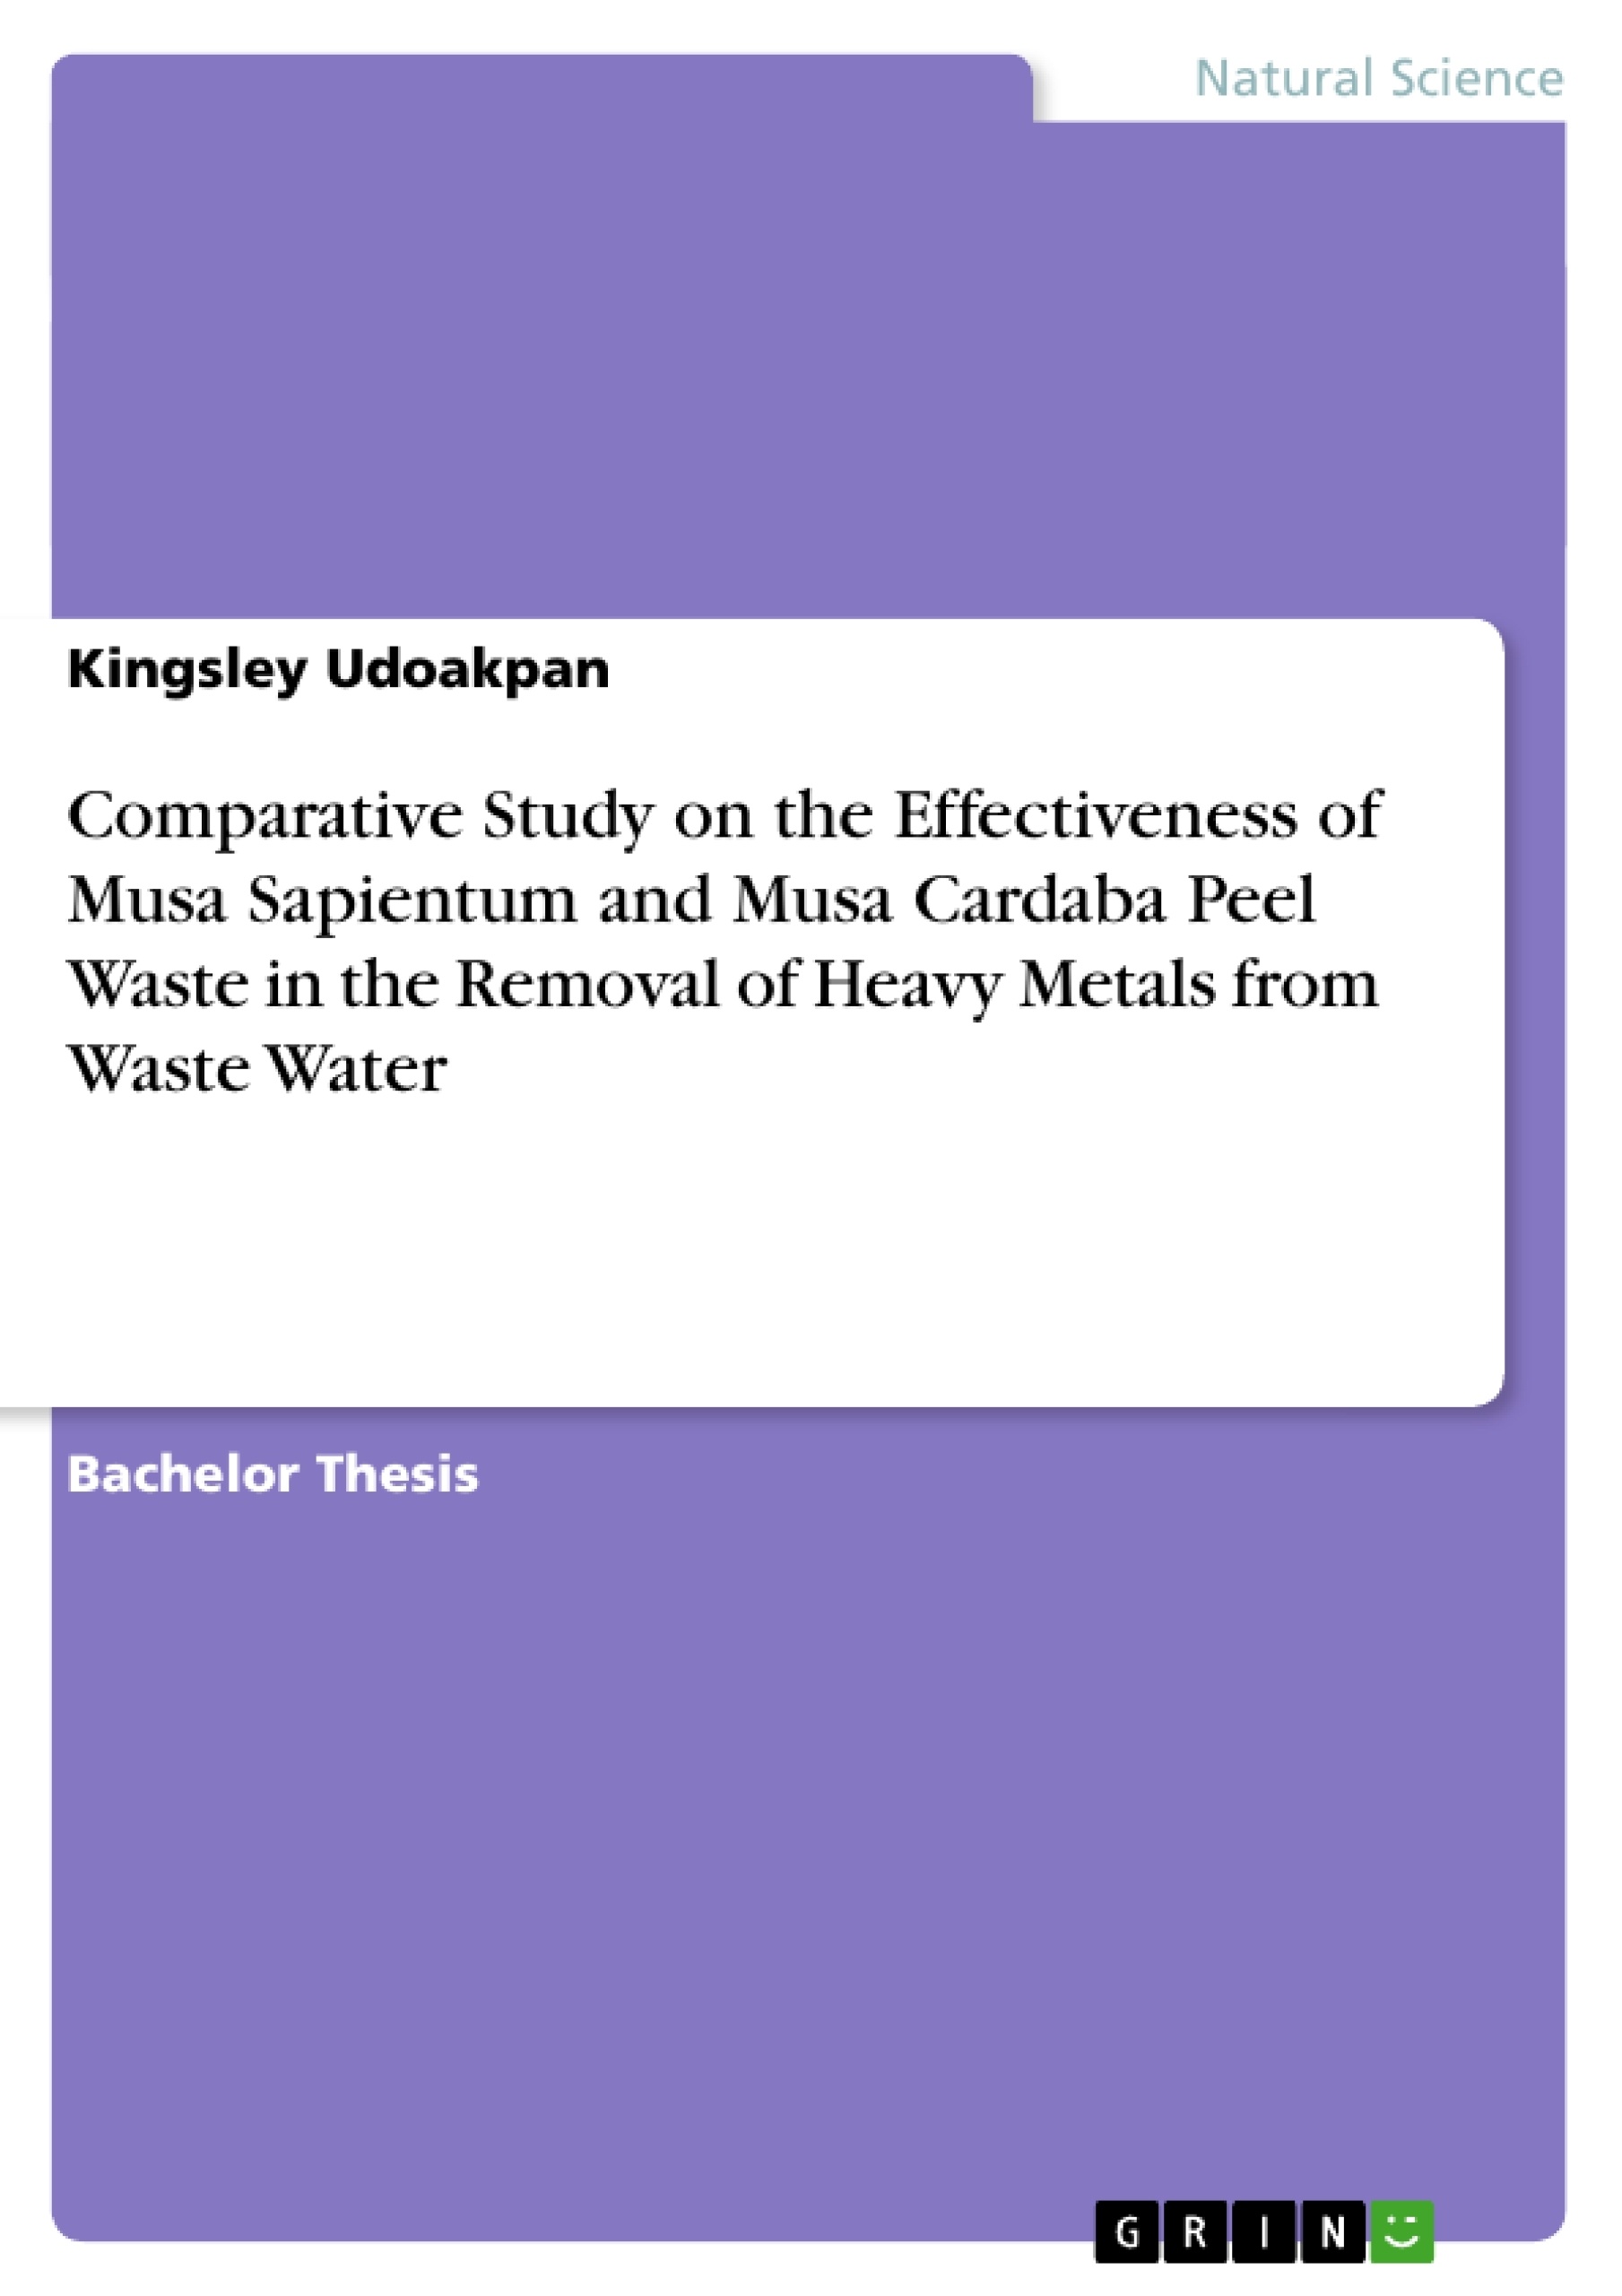 Title: Comparative Study on the Effectiveness of Musa Sapientum and Musa Cardaba Peel Waste in the Removal of Heavy Metals from Waste Water